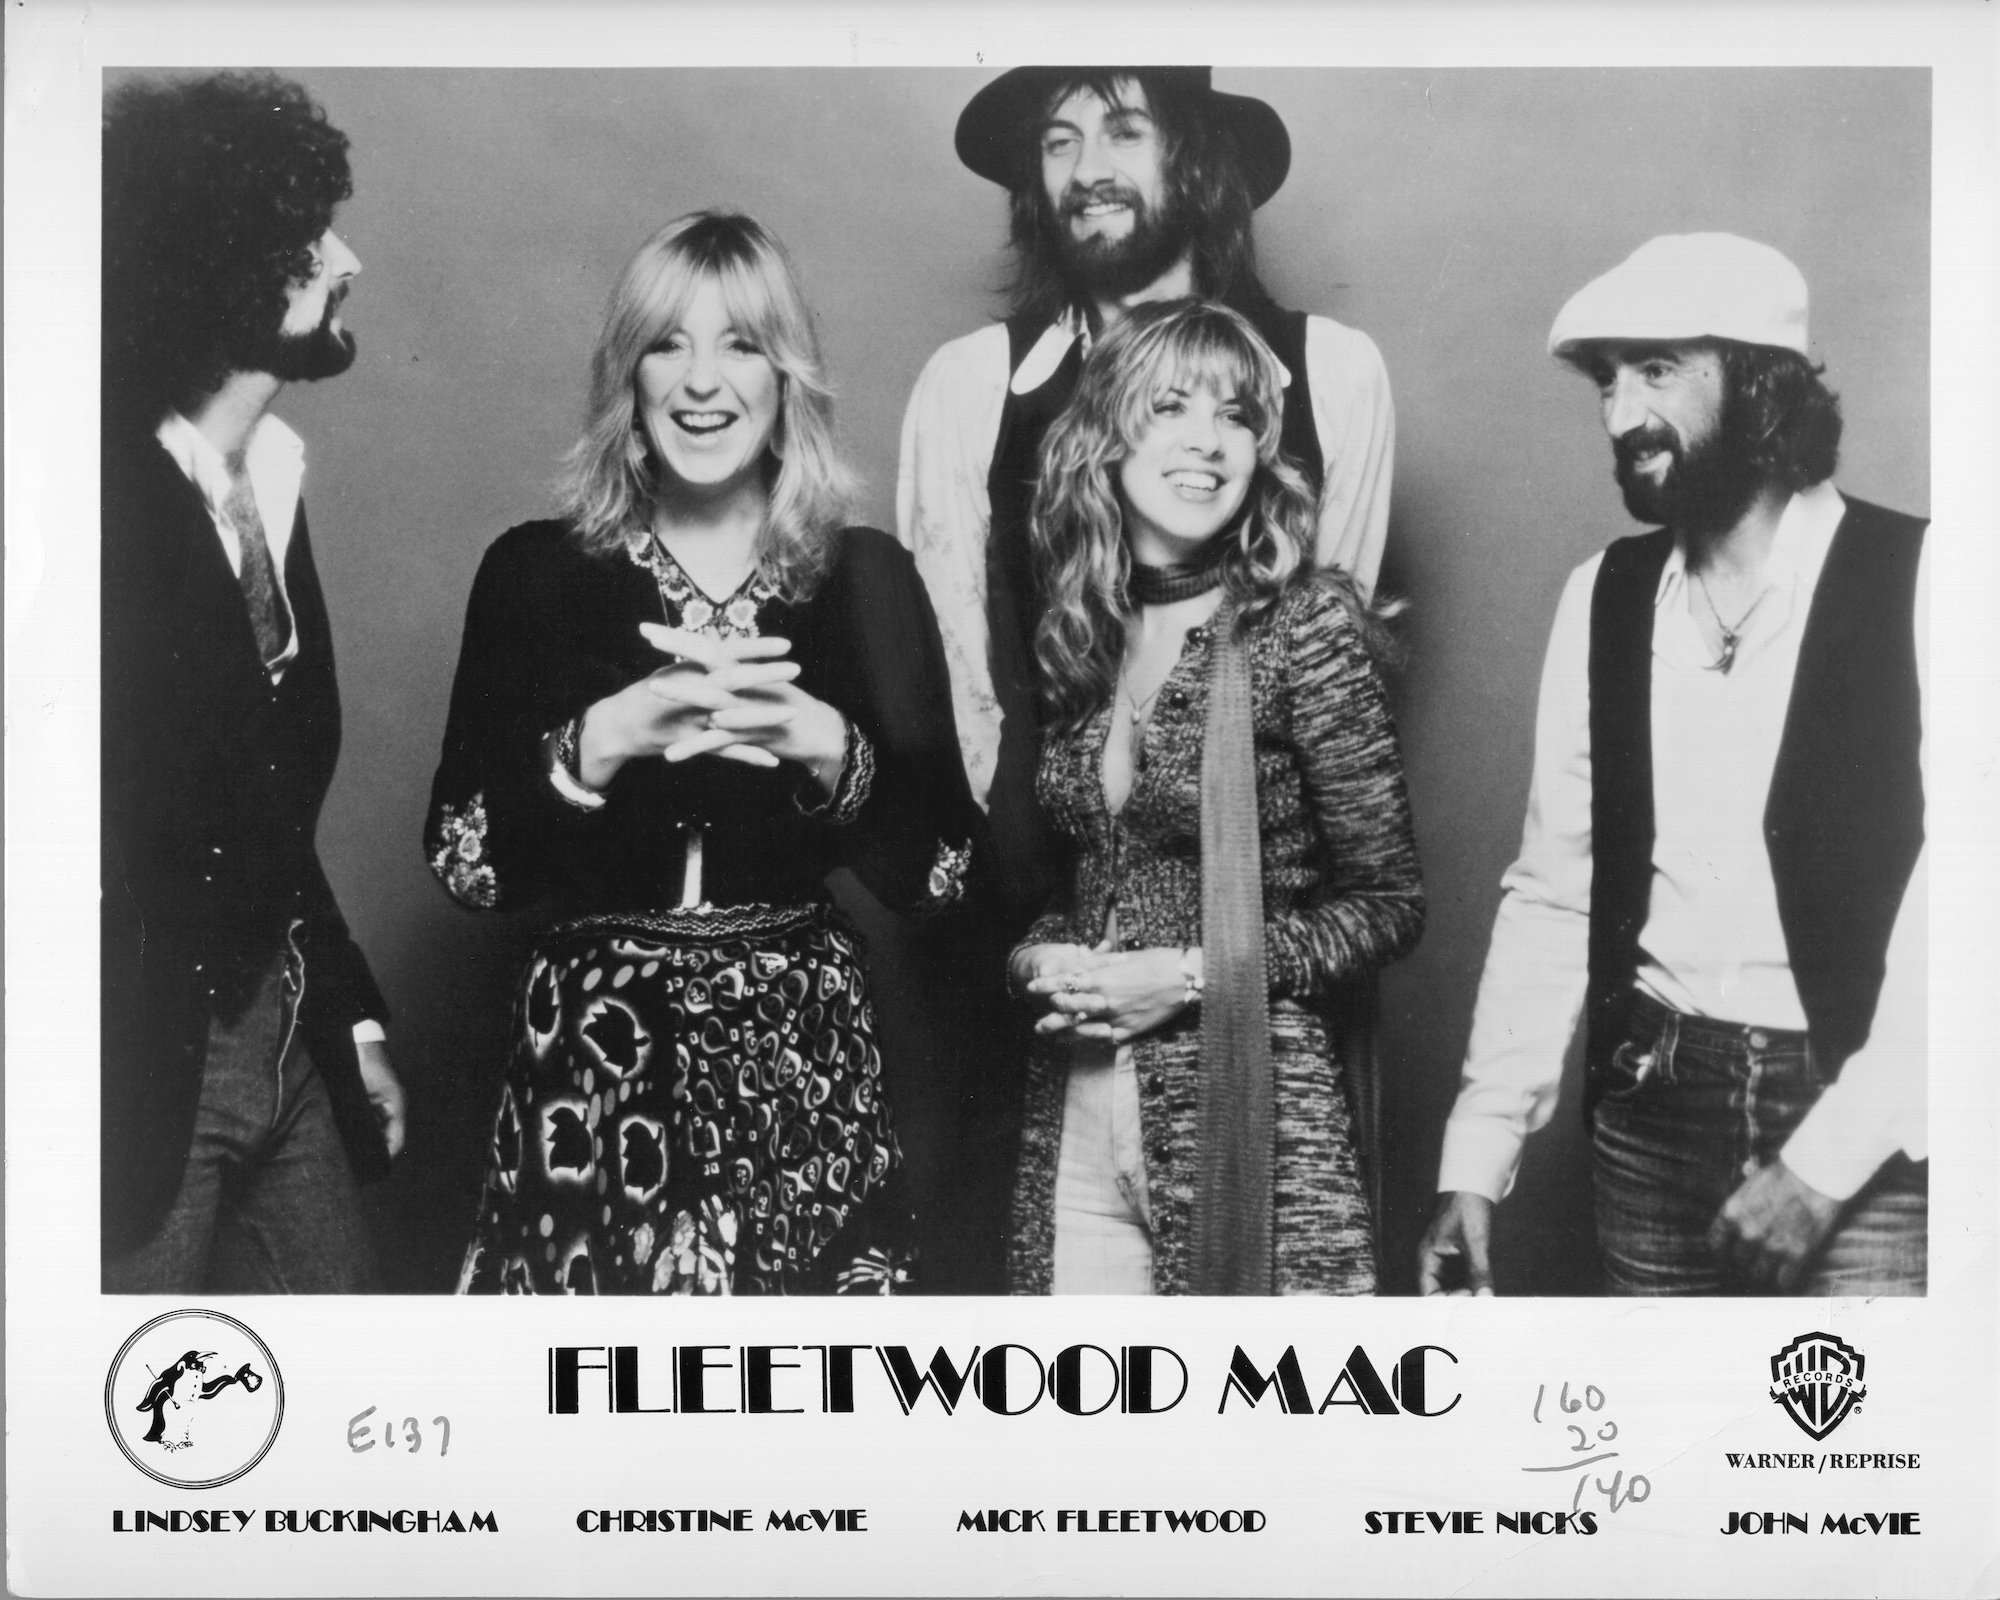 Lindsey Buckingham, Christine McVie, Mick Fleetwood, Stevie Nicks and John McVie of the rock group "Fleetwood Mac" pose for a portrait in 1977.